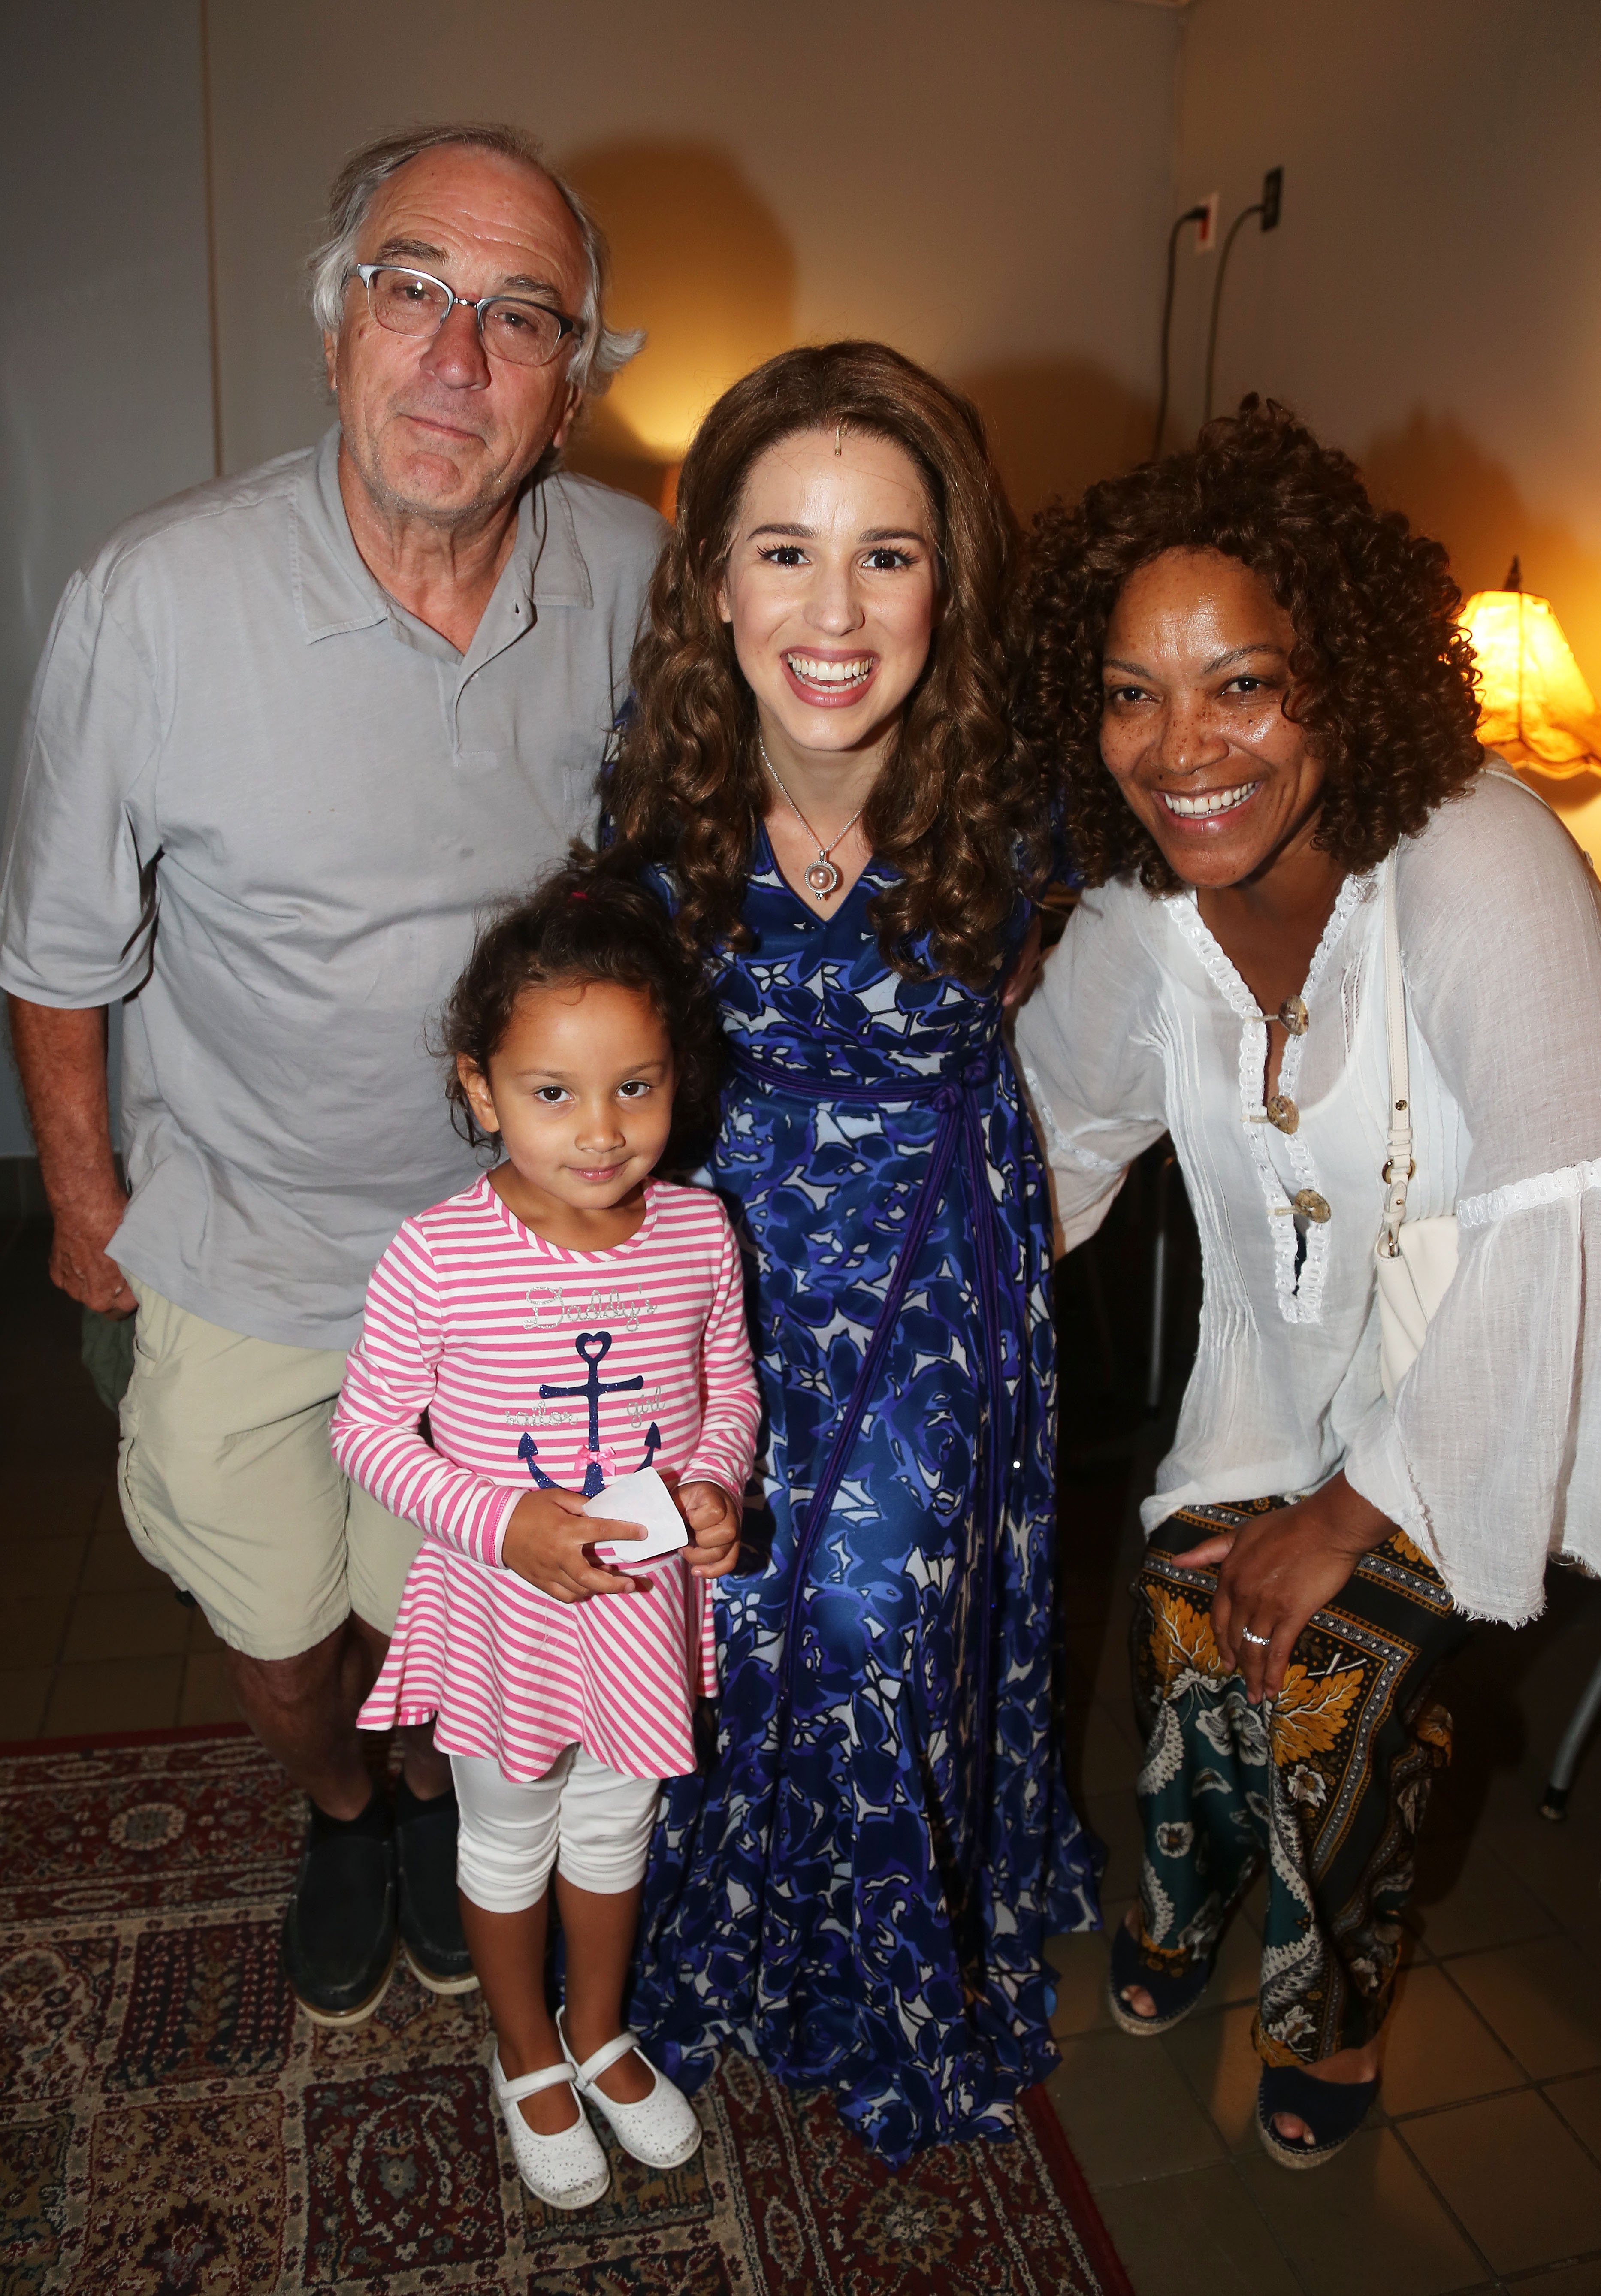 Actor Robert De Niro, daughter Helen Grace, Chilina Kennedy as "Carole King" and actress Grace Hightower De Niro posing backstage at the Carole King musical "Beautiful" on Broadway at The Stephen Sondheim Theater on September 2, 2015 in New York City | Source: Getty Images